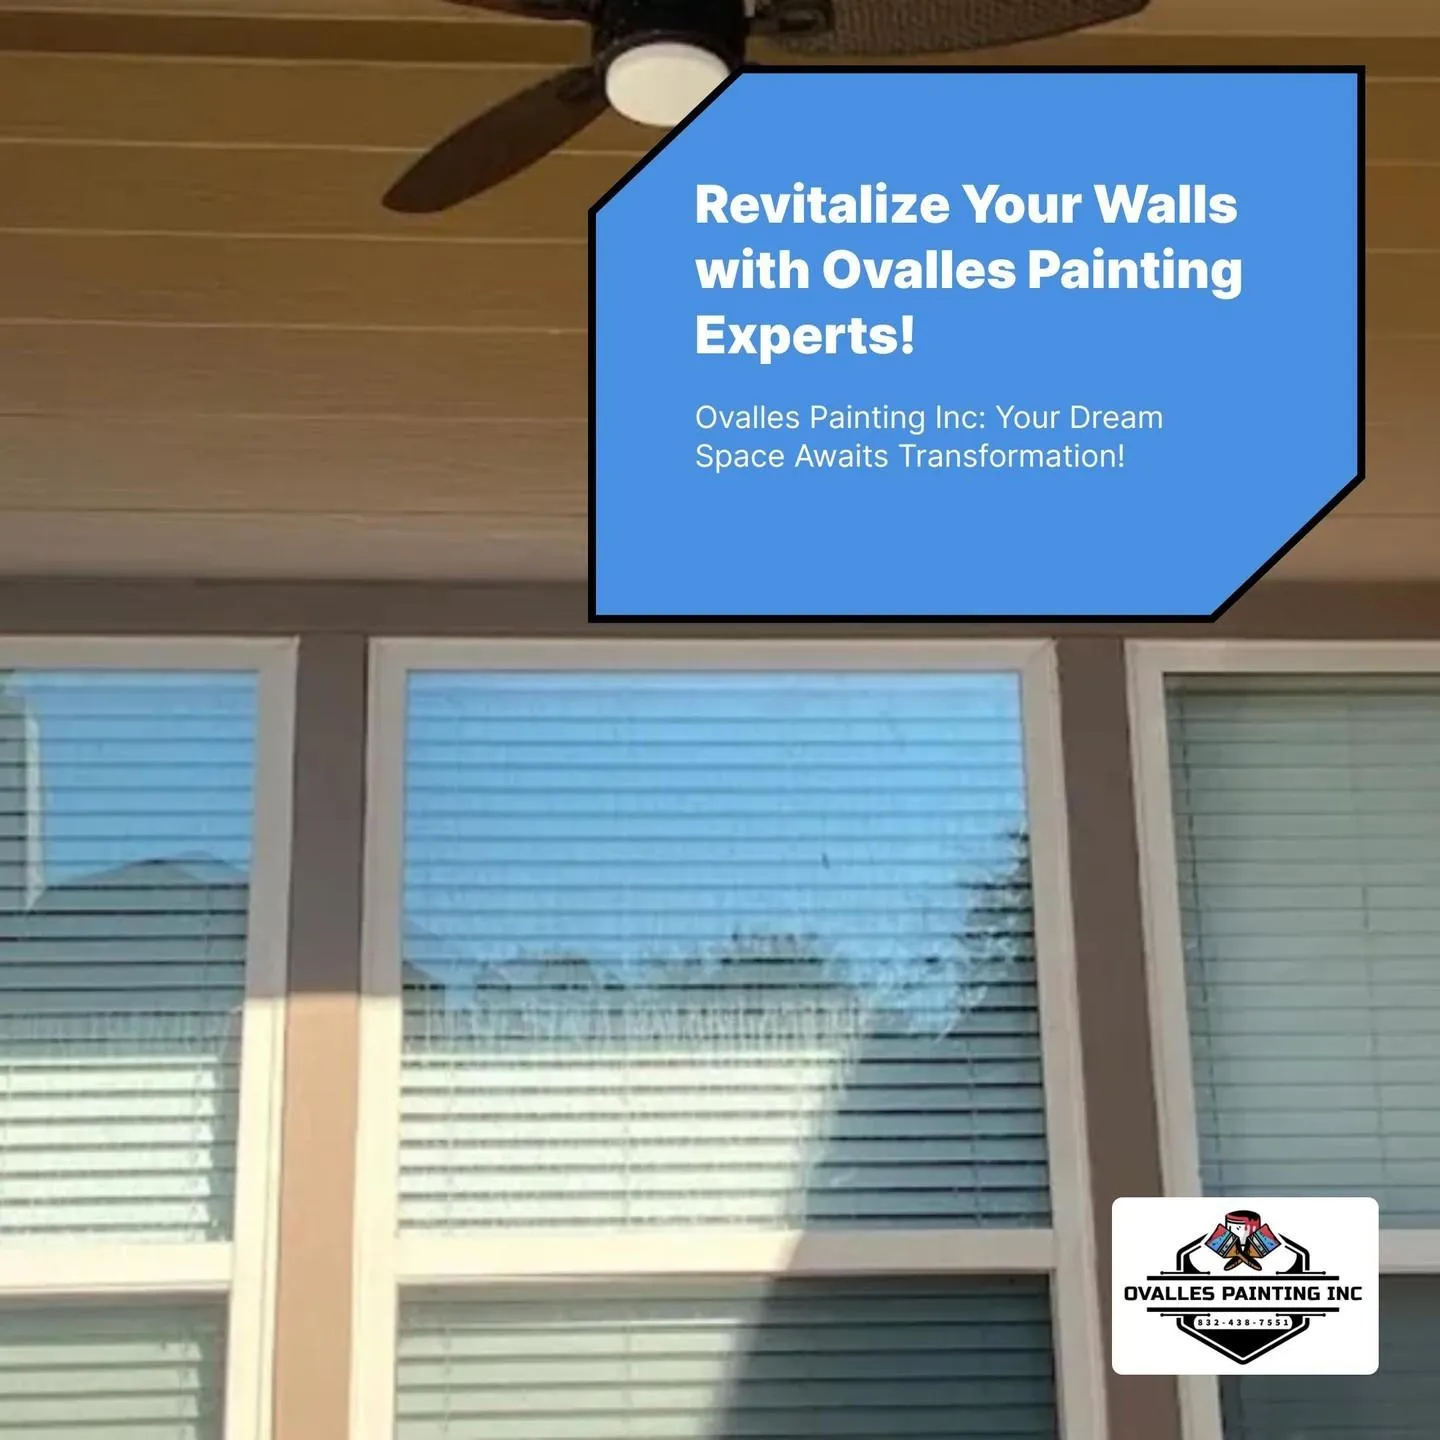 Exterior Painting for Ovalles Painting Inc in Katy, TX